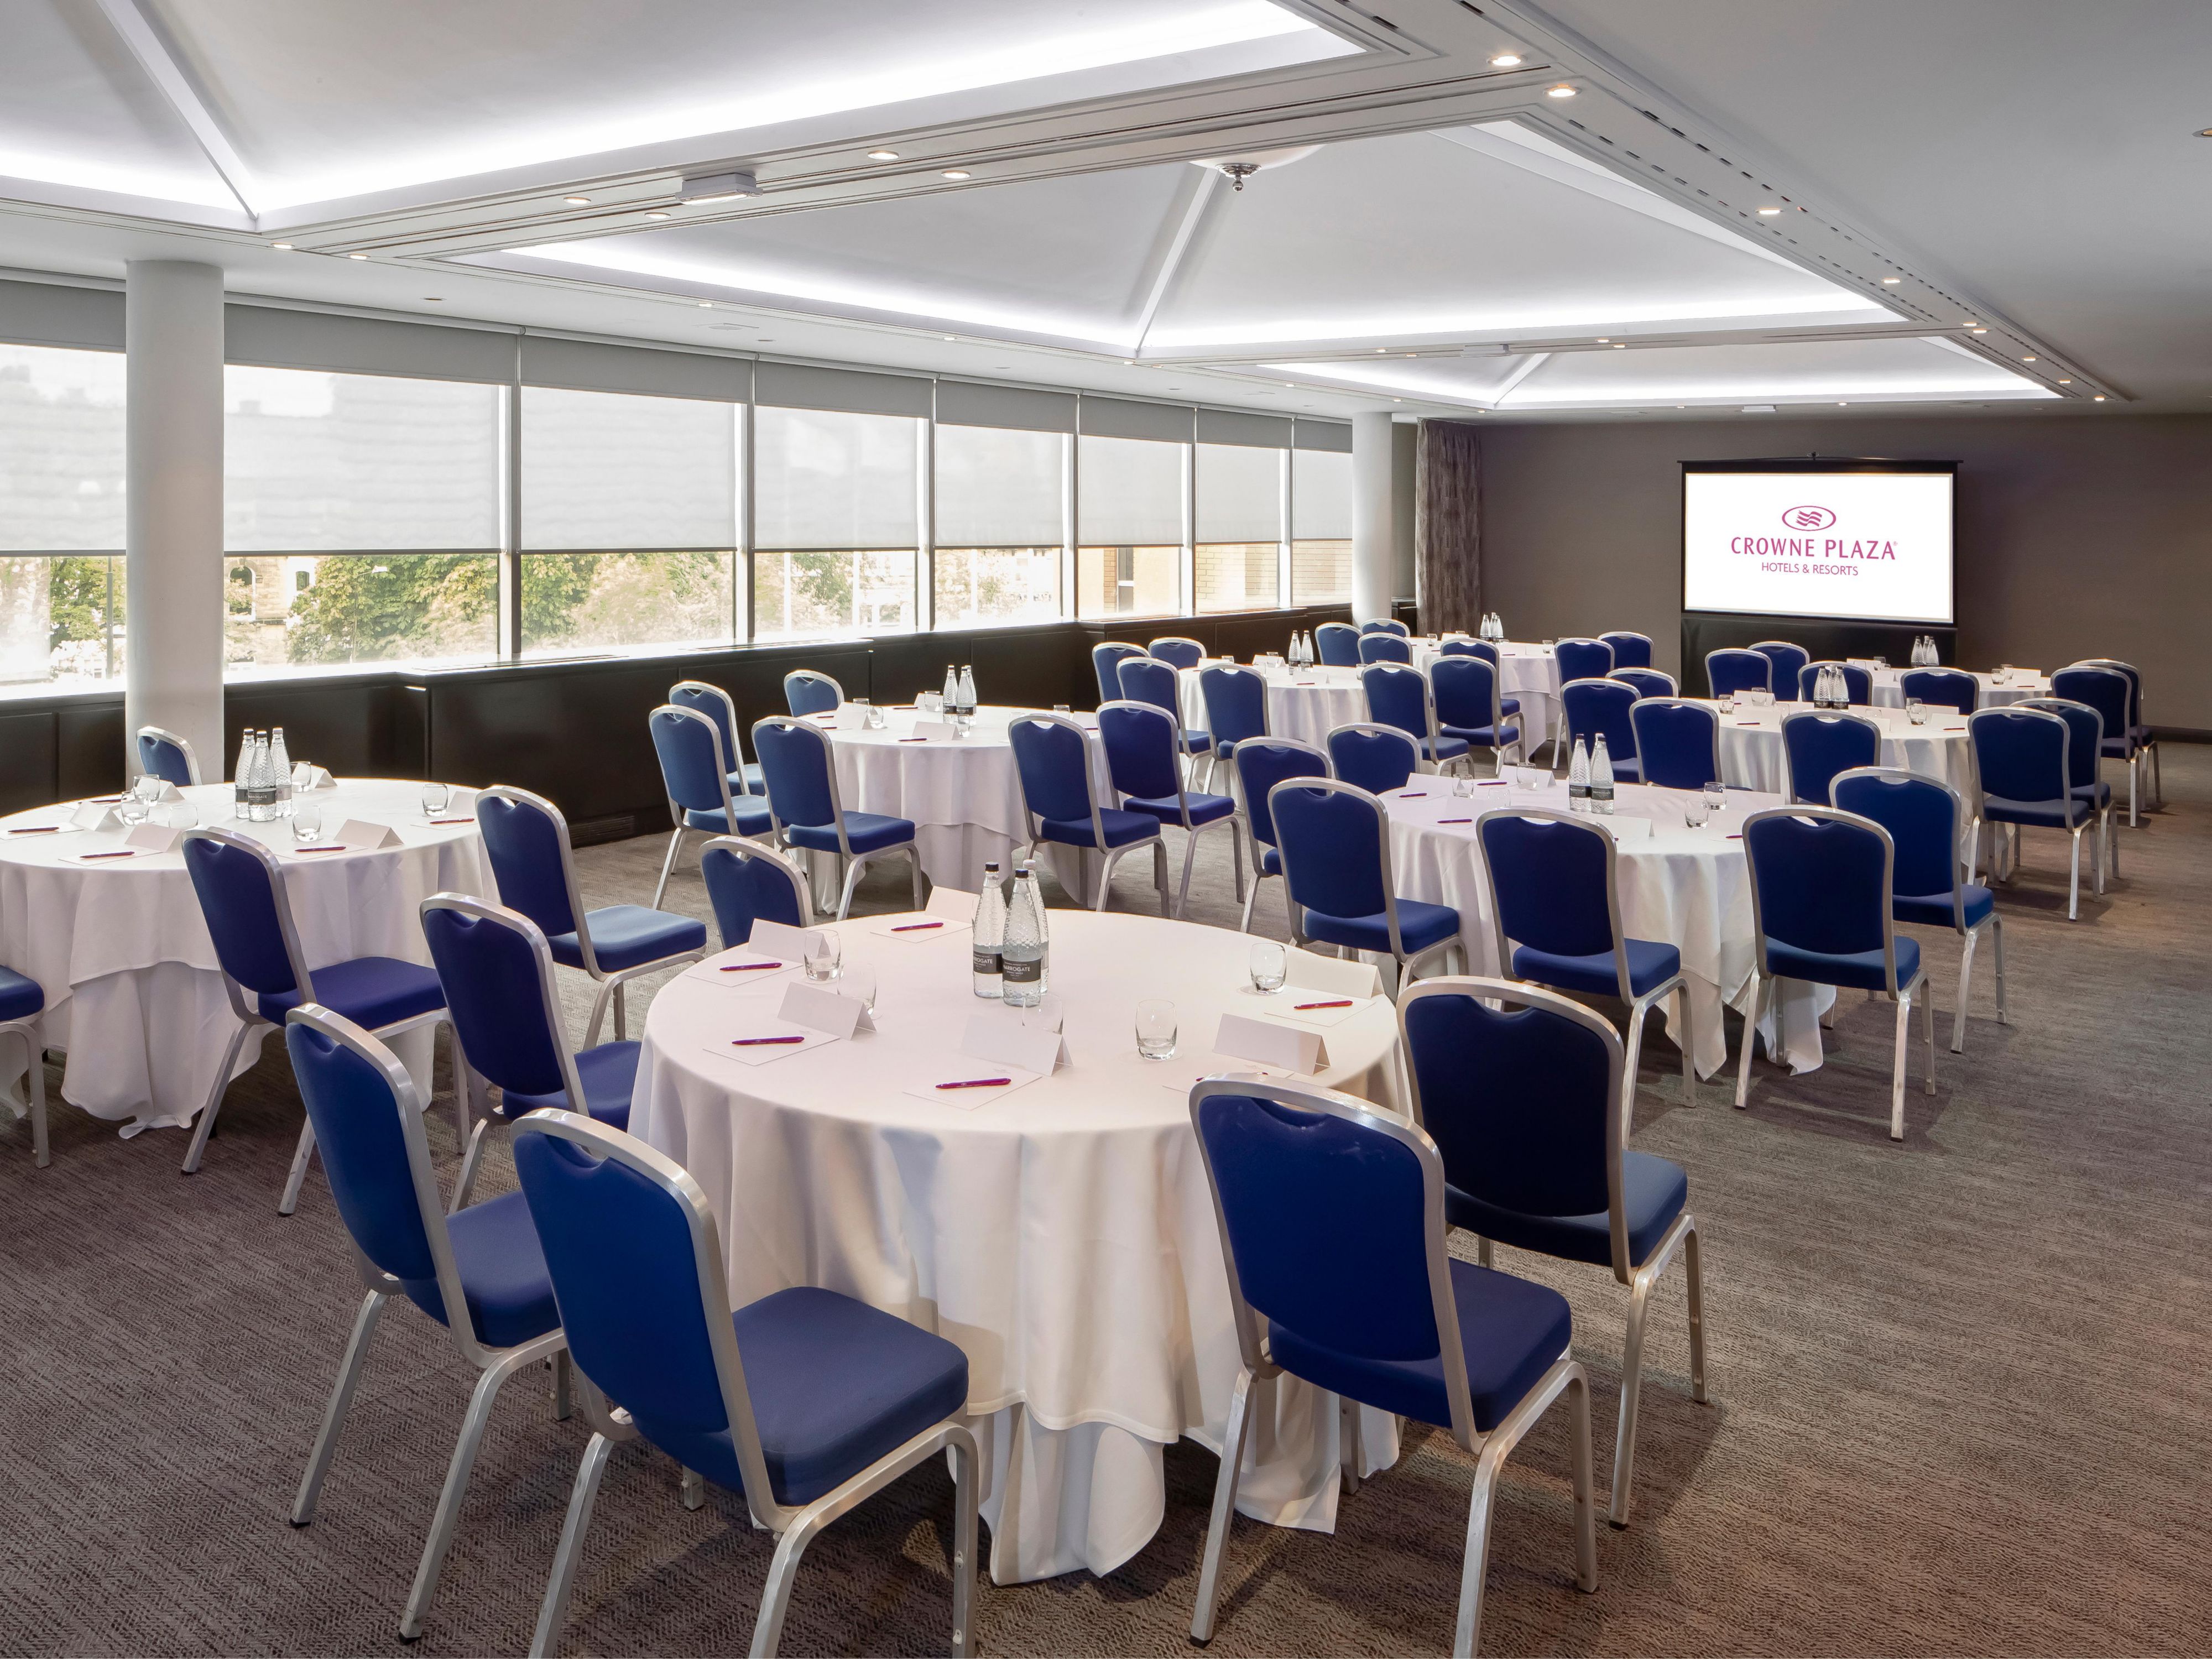 Looking for somewhere to conduct interviews, or perhaps host a conference for up to 400 delegates? We have the perfect flexible meeting space for you and will ensure that your plans are delivered exactly as you expect. After all, we're all business, mostly.